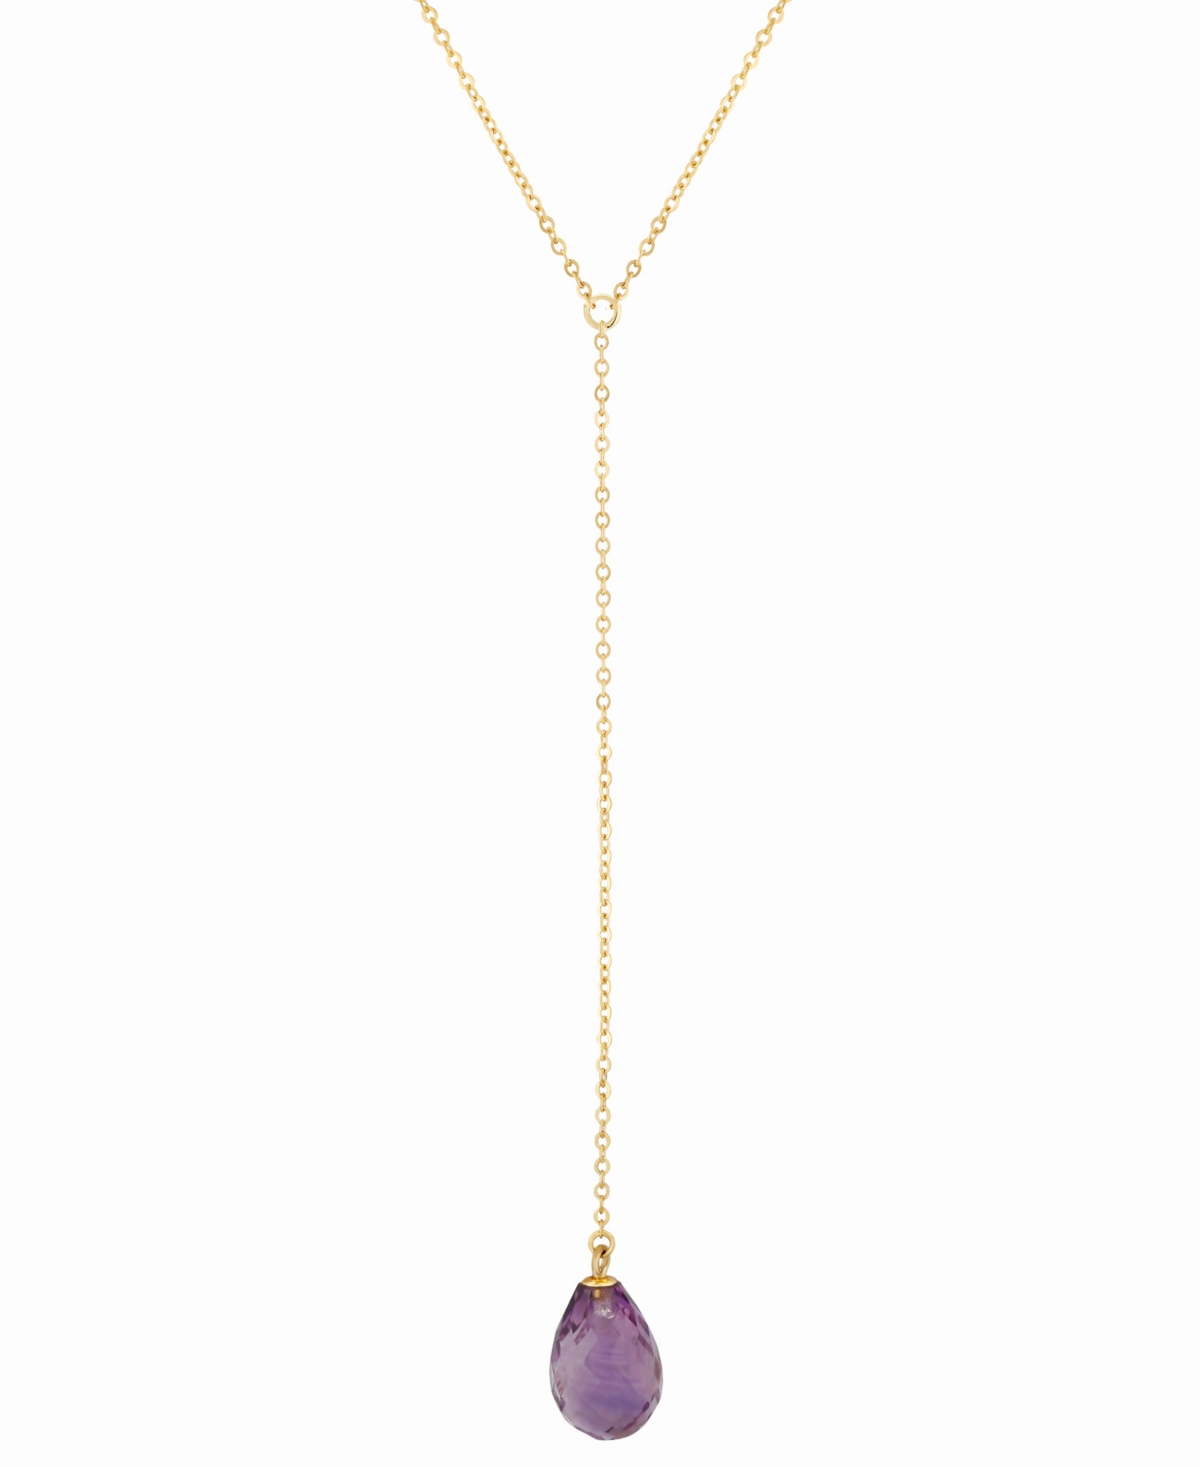 Macy's Amethyst Briolette 26" Lariat Necklace (2-5/8 ct. t.w.) in 14k Gold (Also in Peridot